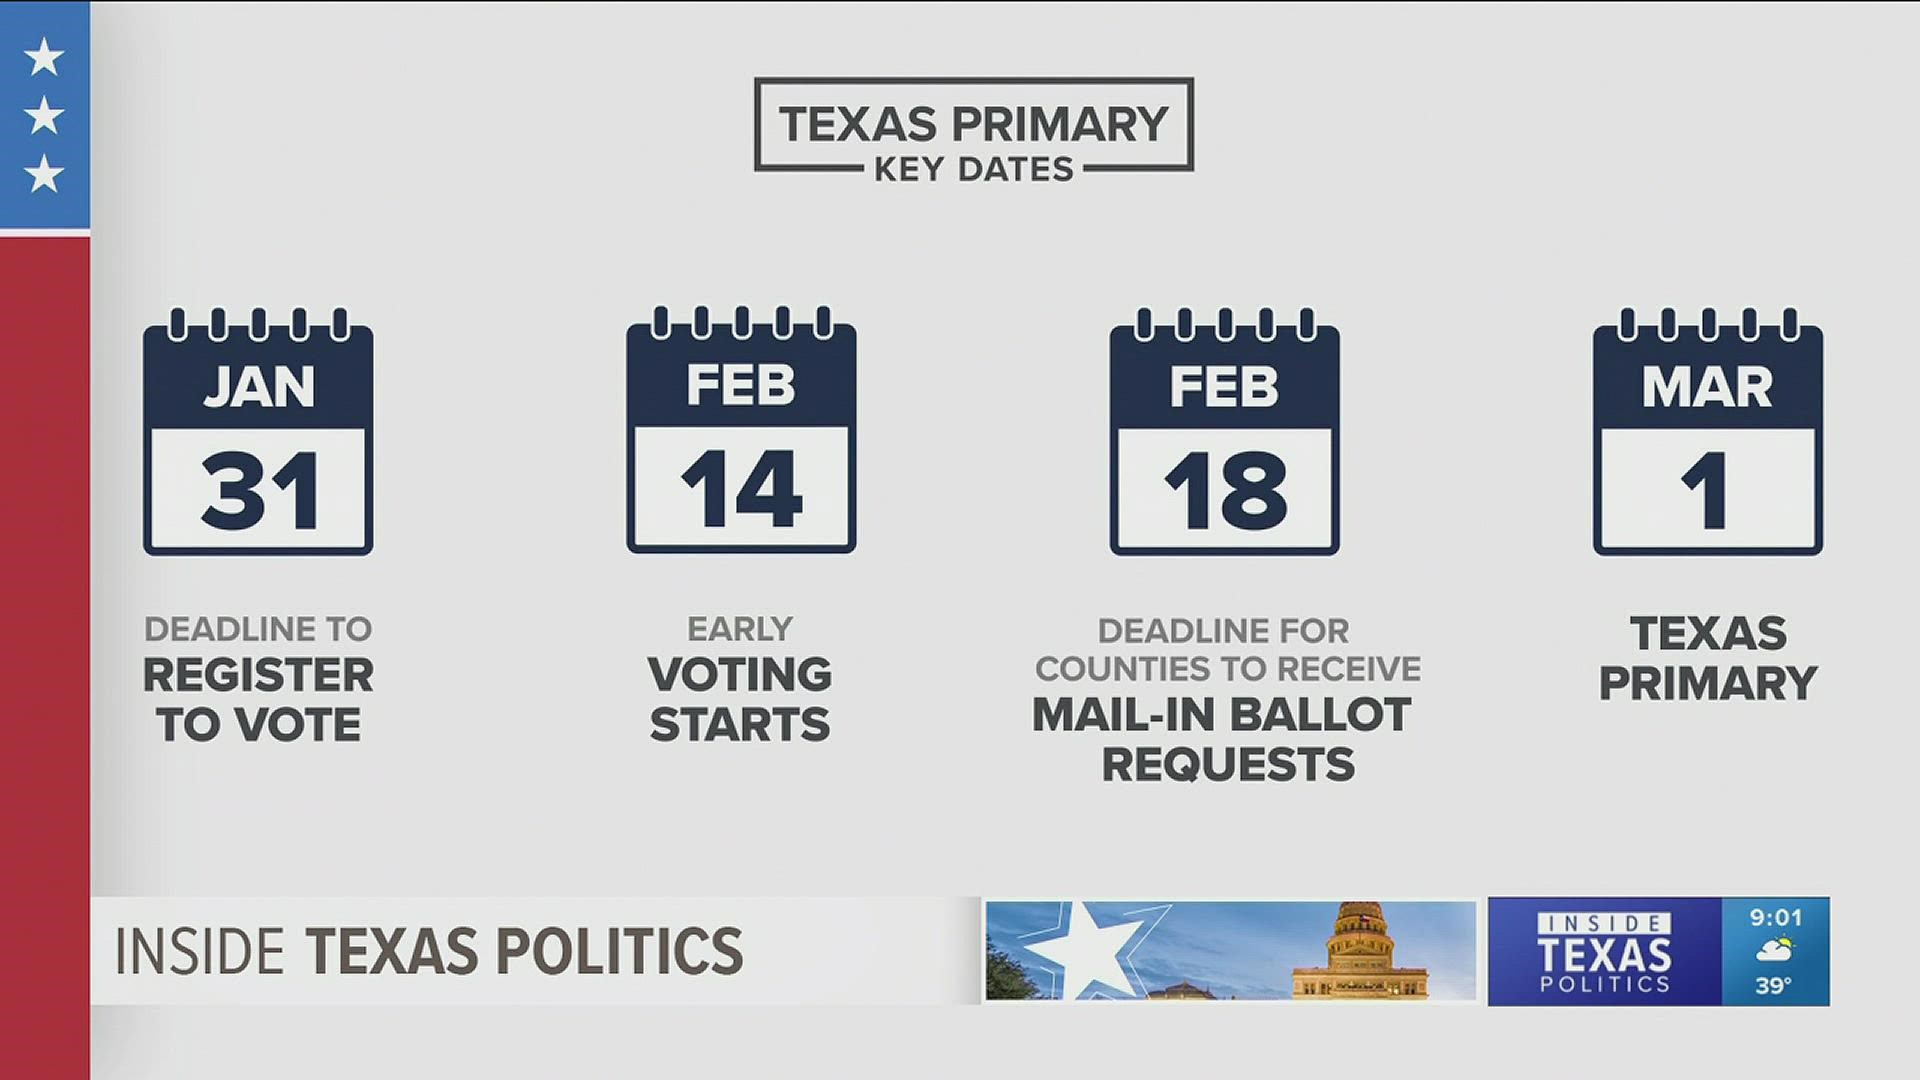 The March primary election is about a month away.